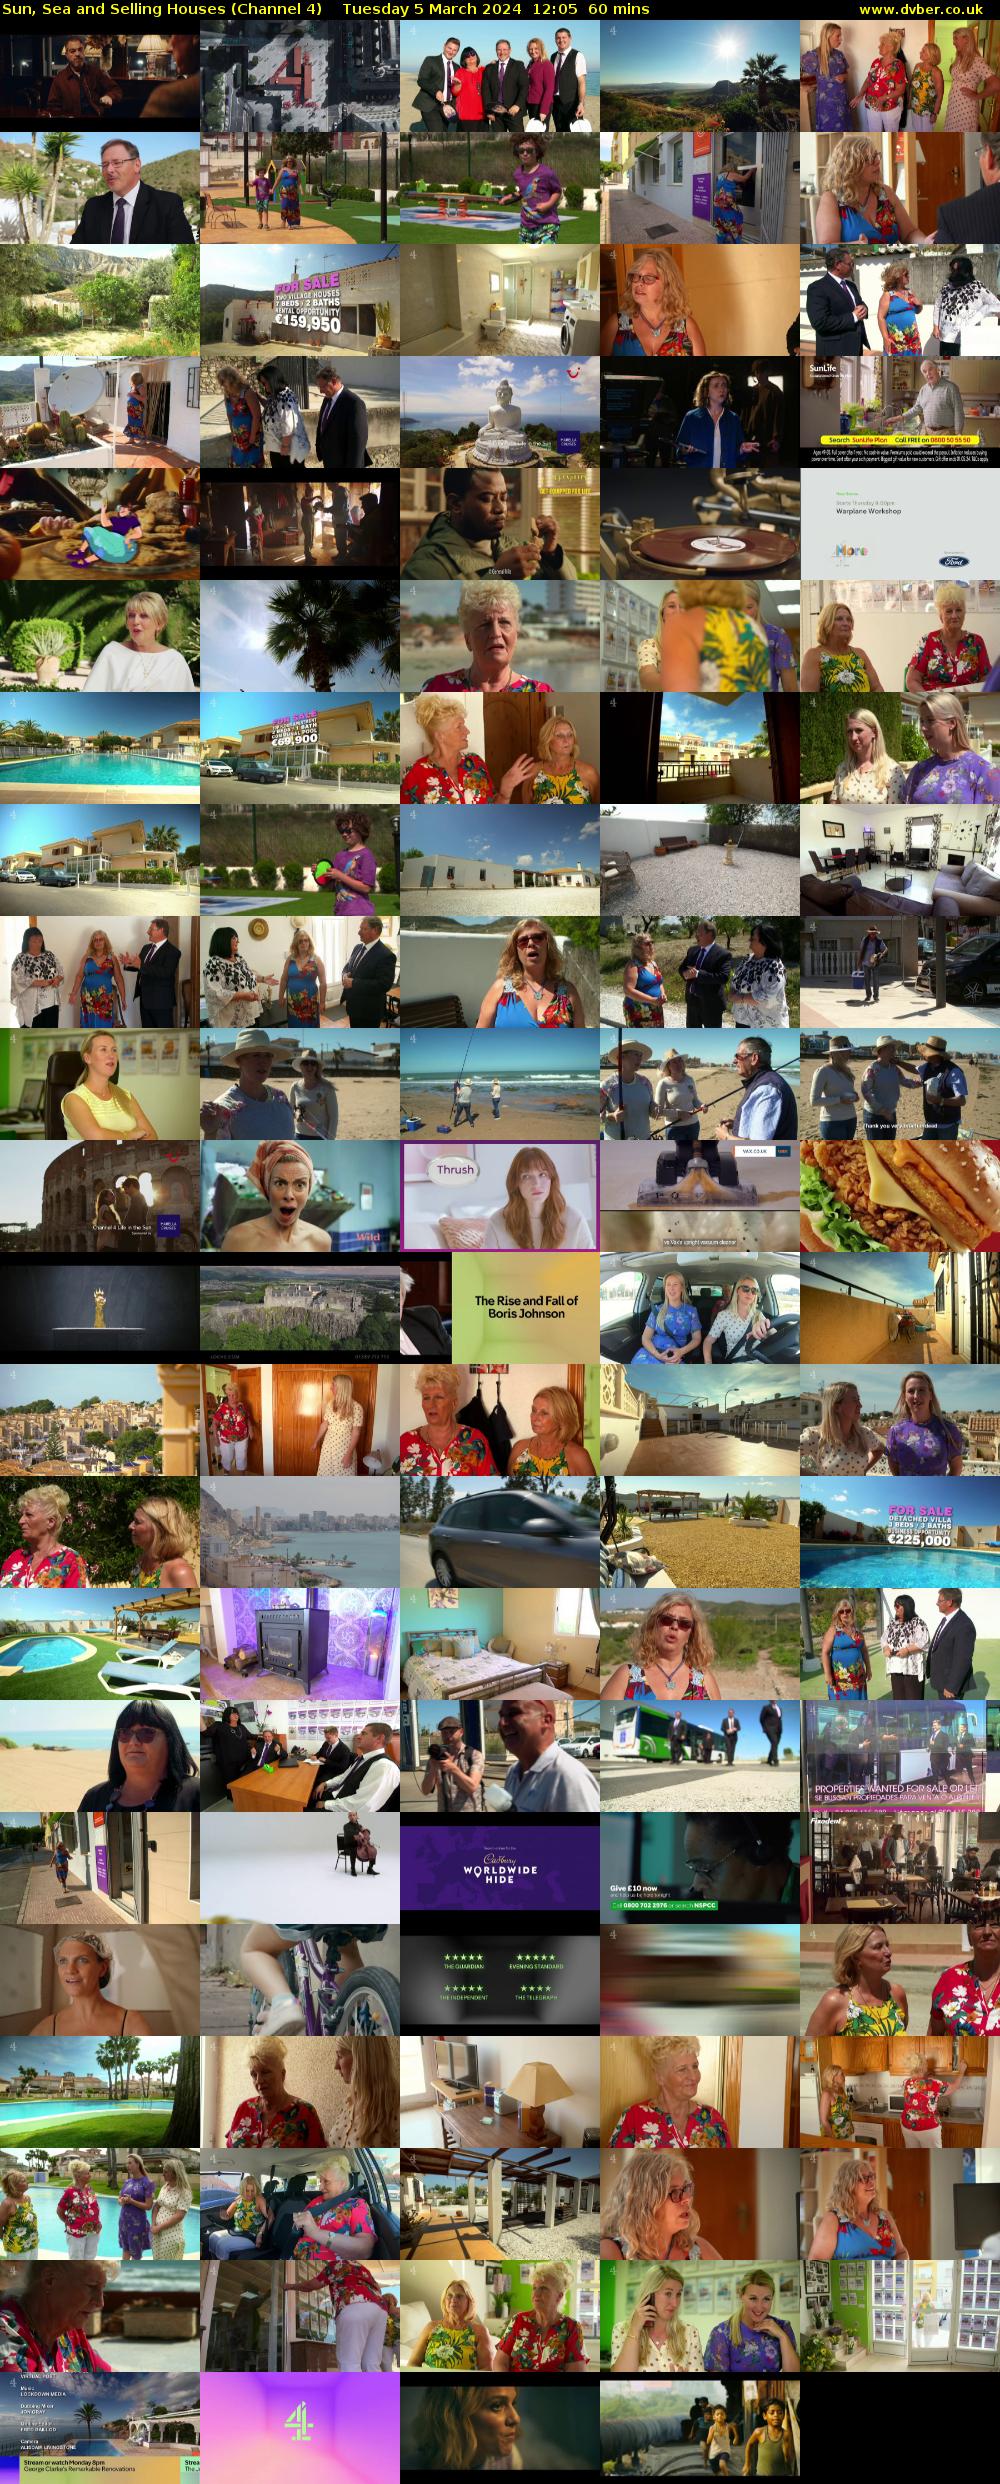 Sun, Sea and Selling Houses (Channel 4) Tuesday 5 March 2024 12:05 - 13:05